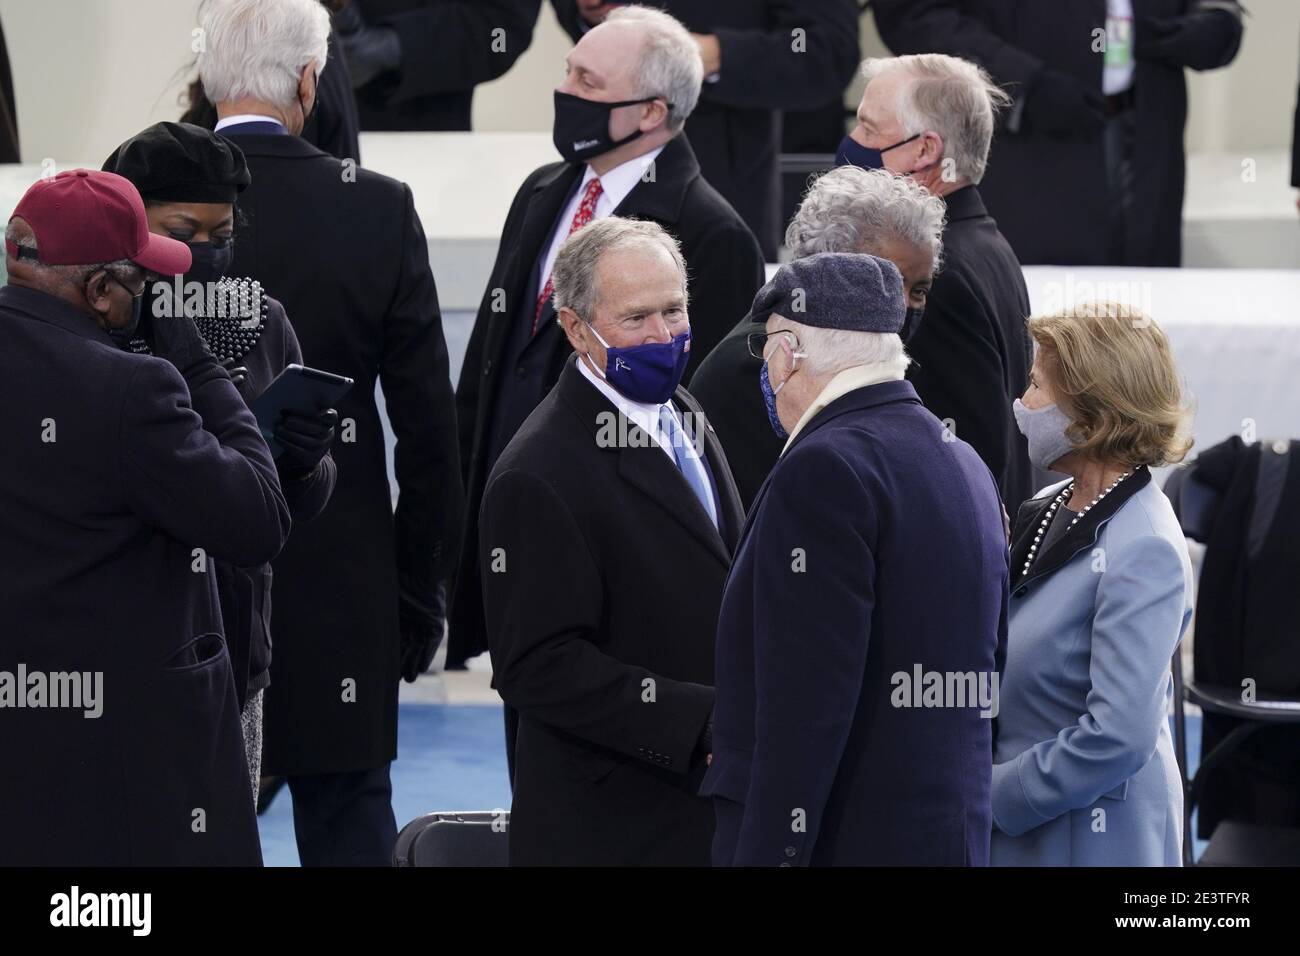 Former U.S. President George W. Bush, center, wears a protective mask  during the 59th presidential inauguration in Washington, DC, U.S., on  Wednesday, Jan. 20, 2021. Biden will propose a broad immigration overhaul